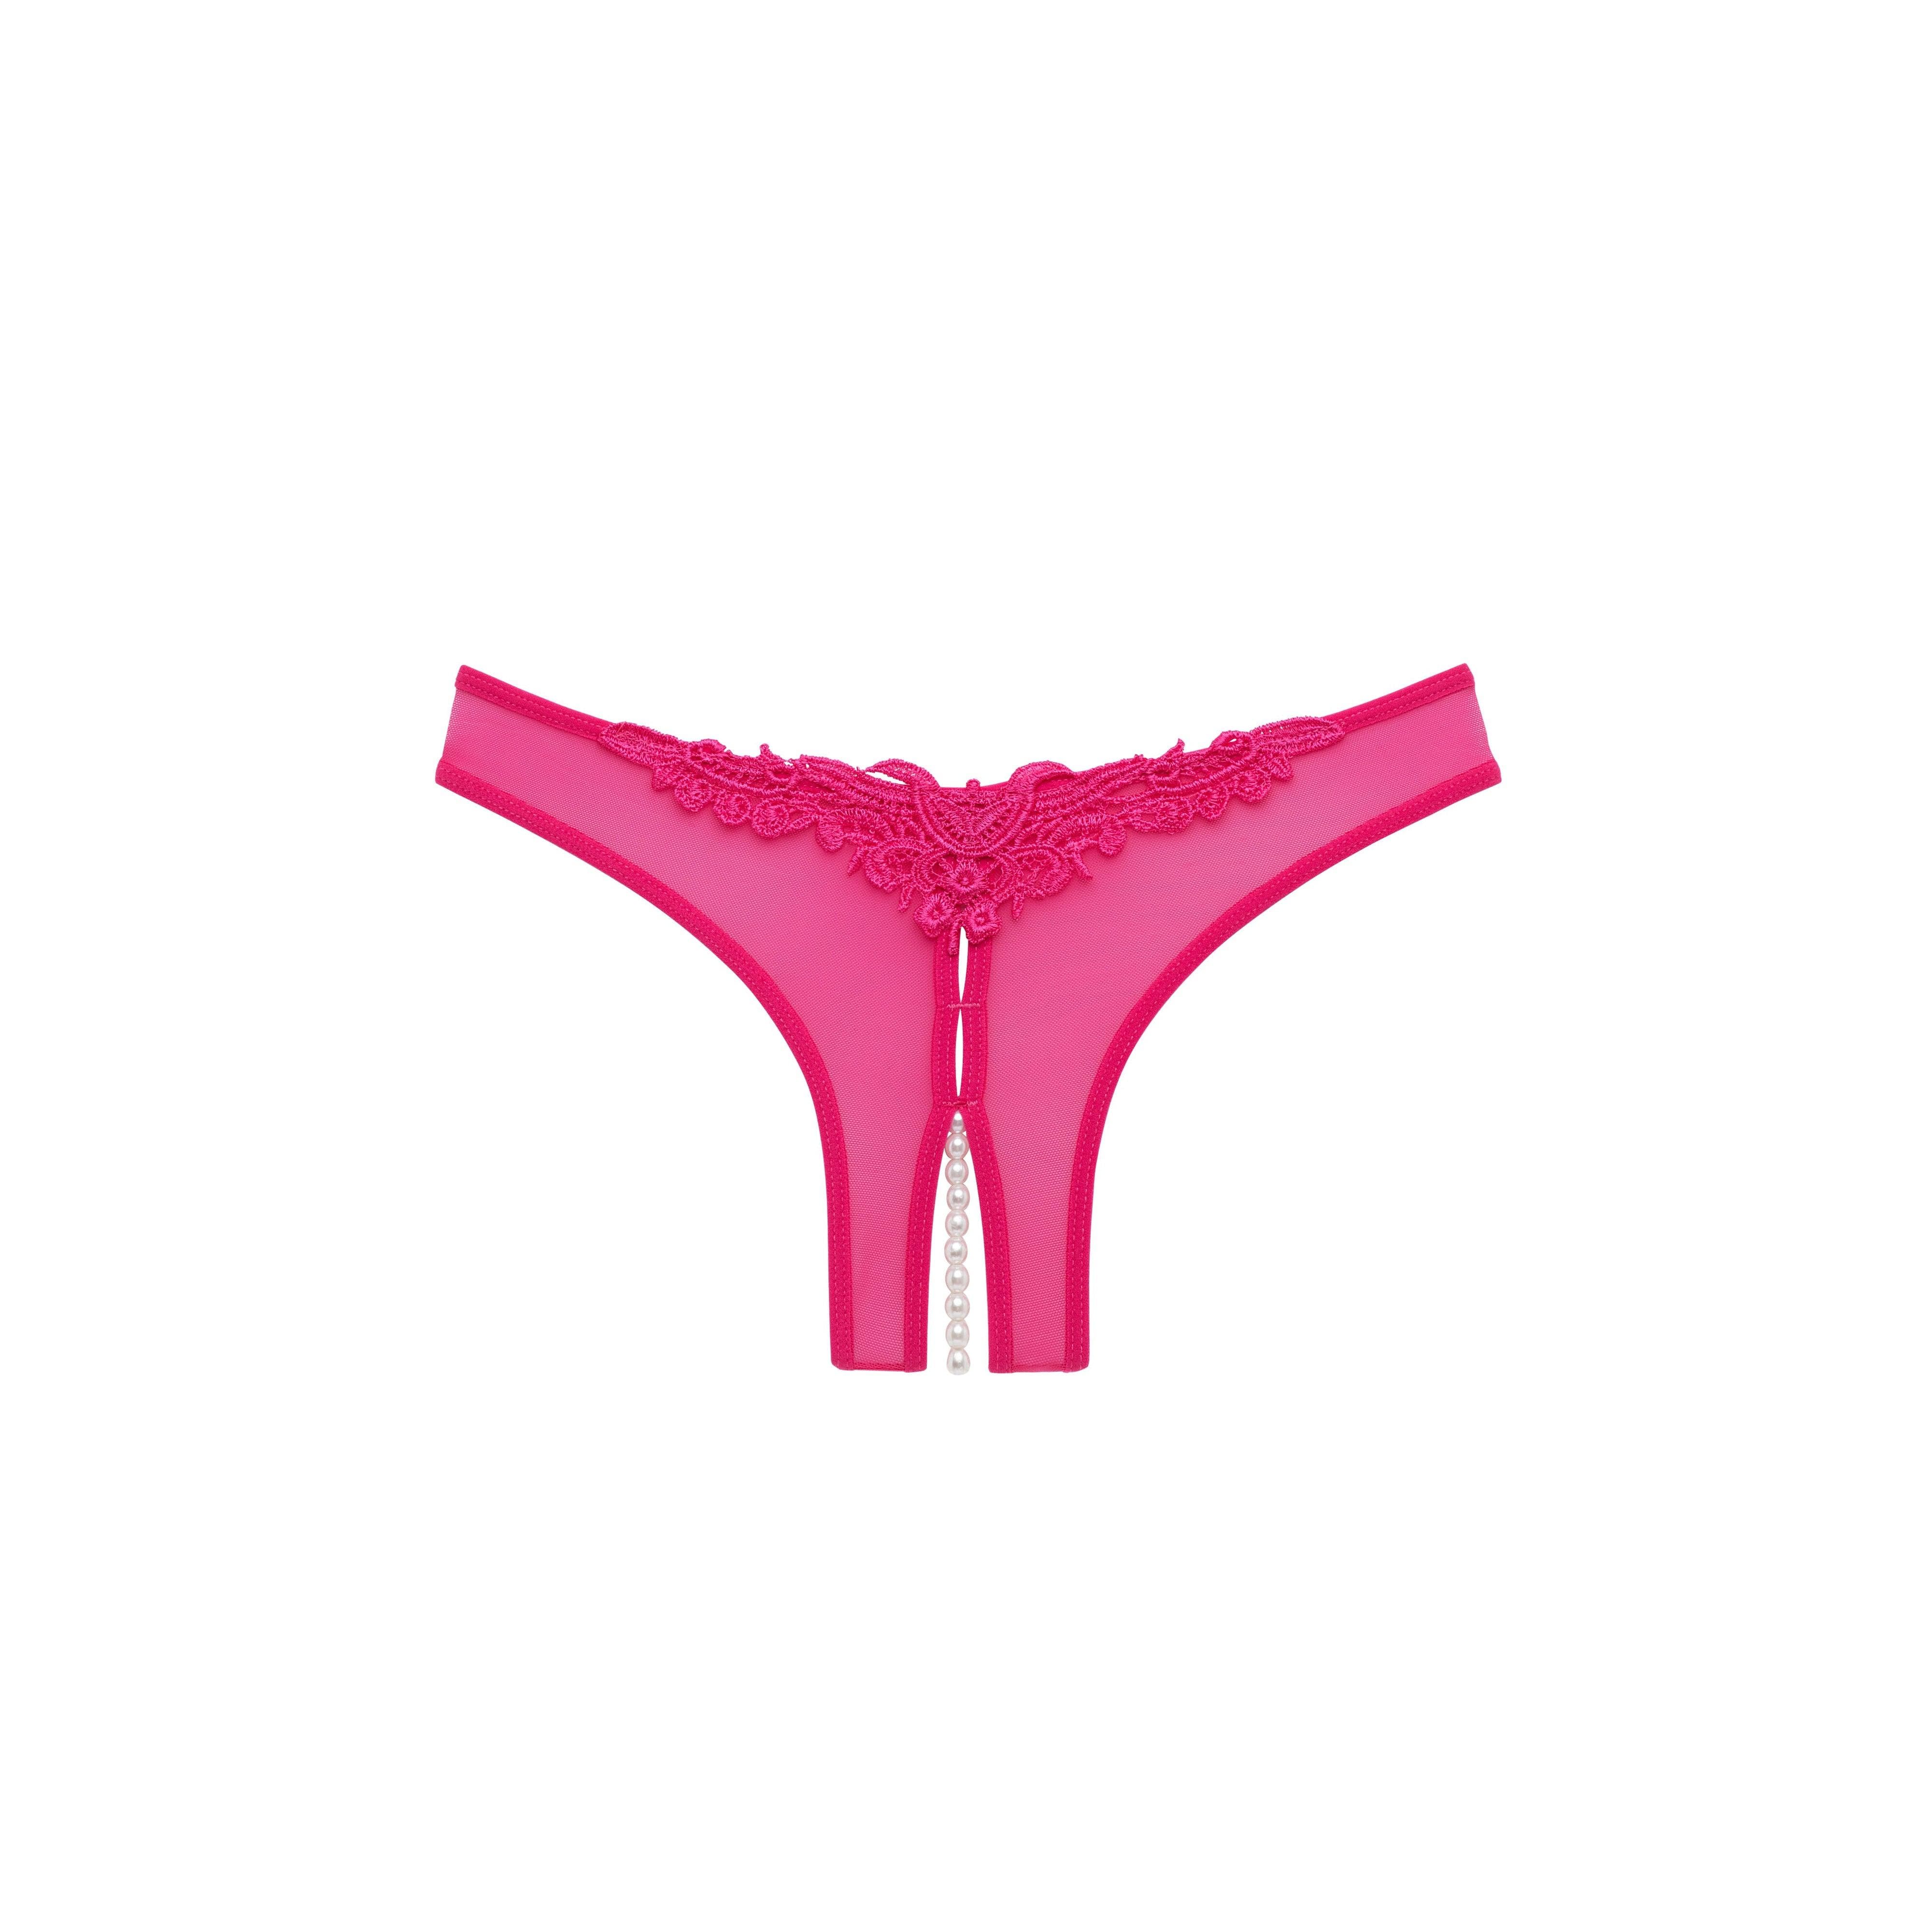 Buy Pink Queen Women Sexy Plus Size Butt Plug Crotchless Panties